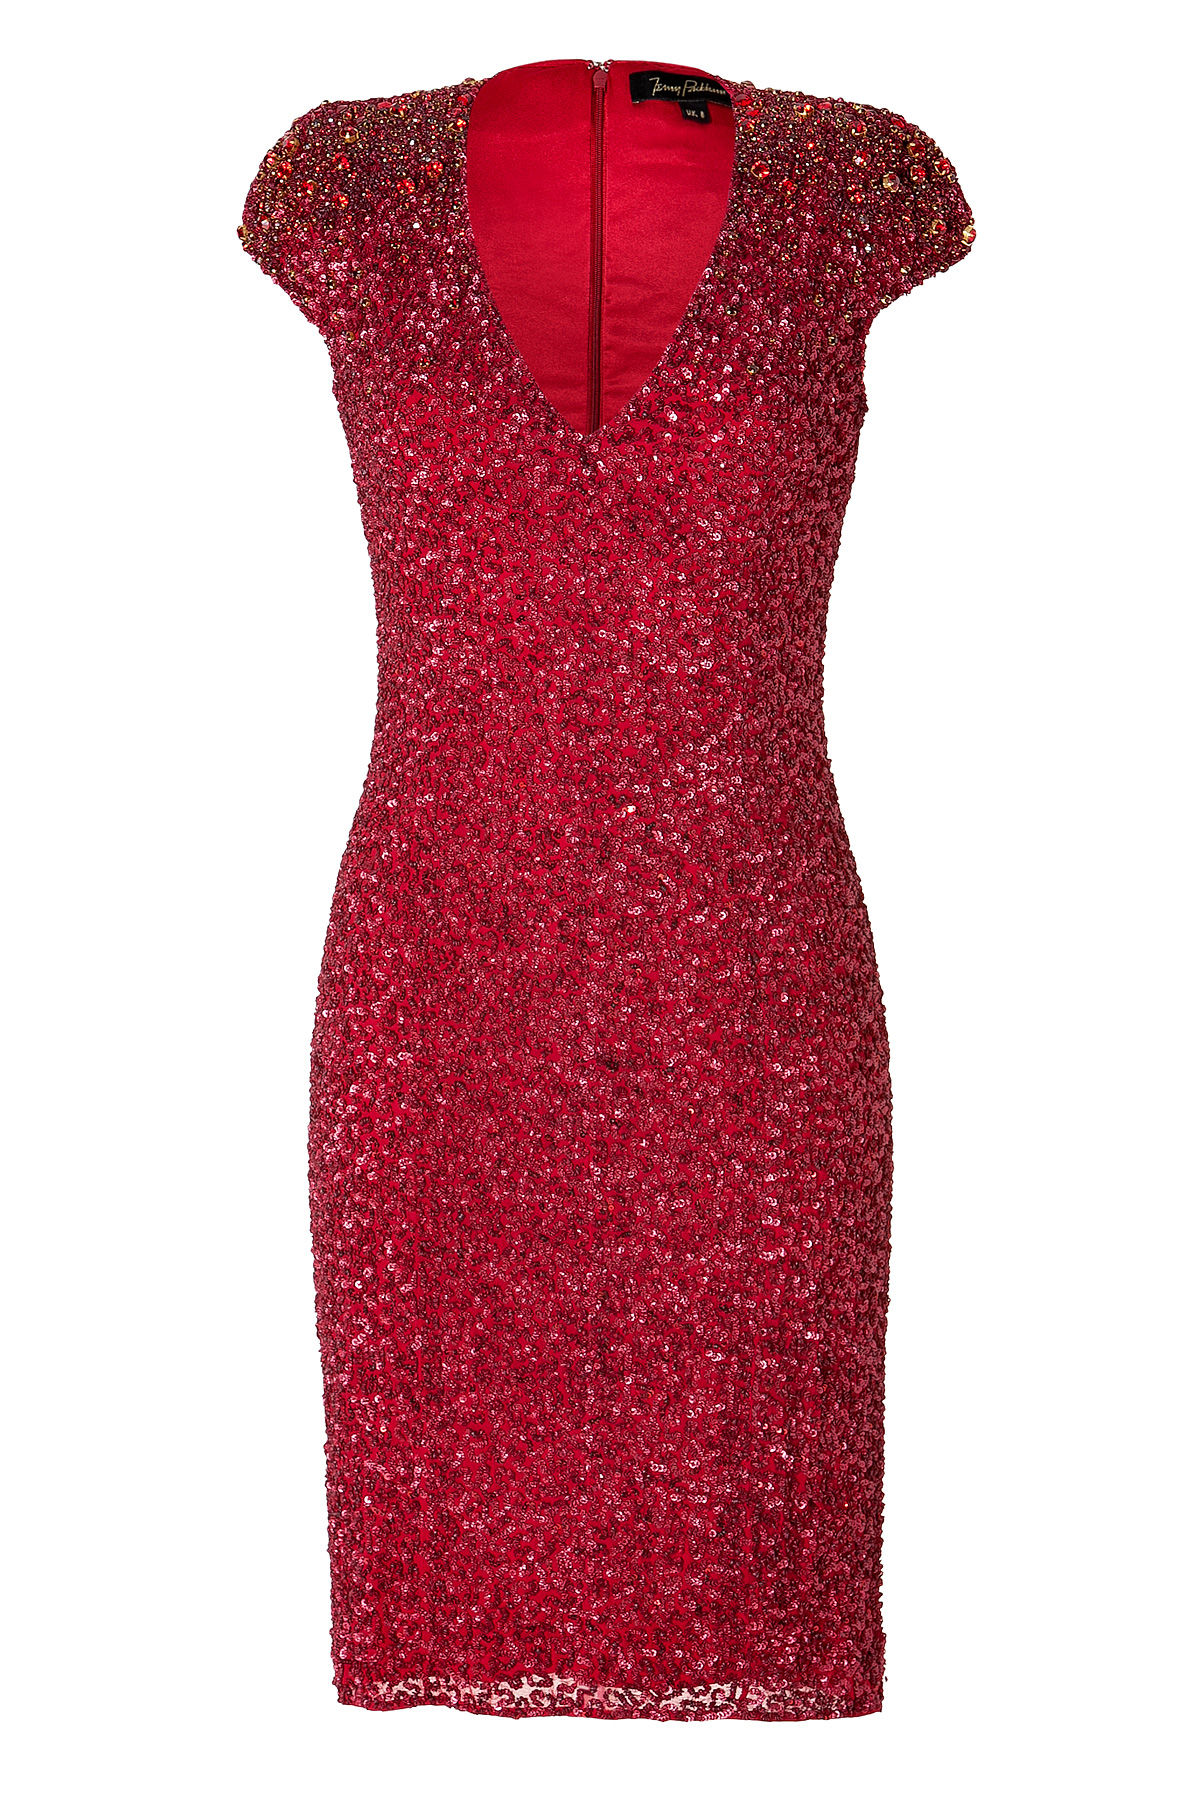 Lyst - Jenny packham Silk Sequined Dress In Rojo in Red